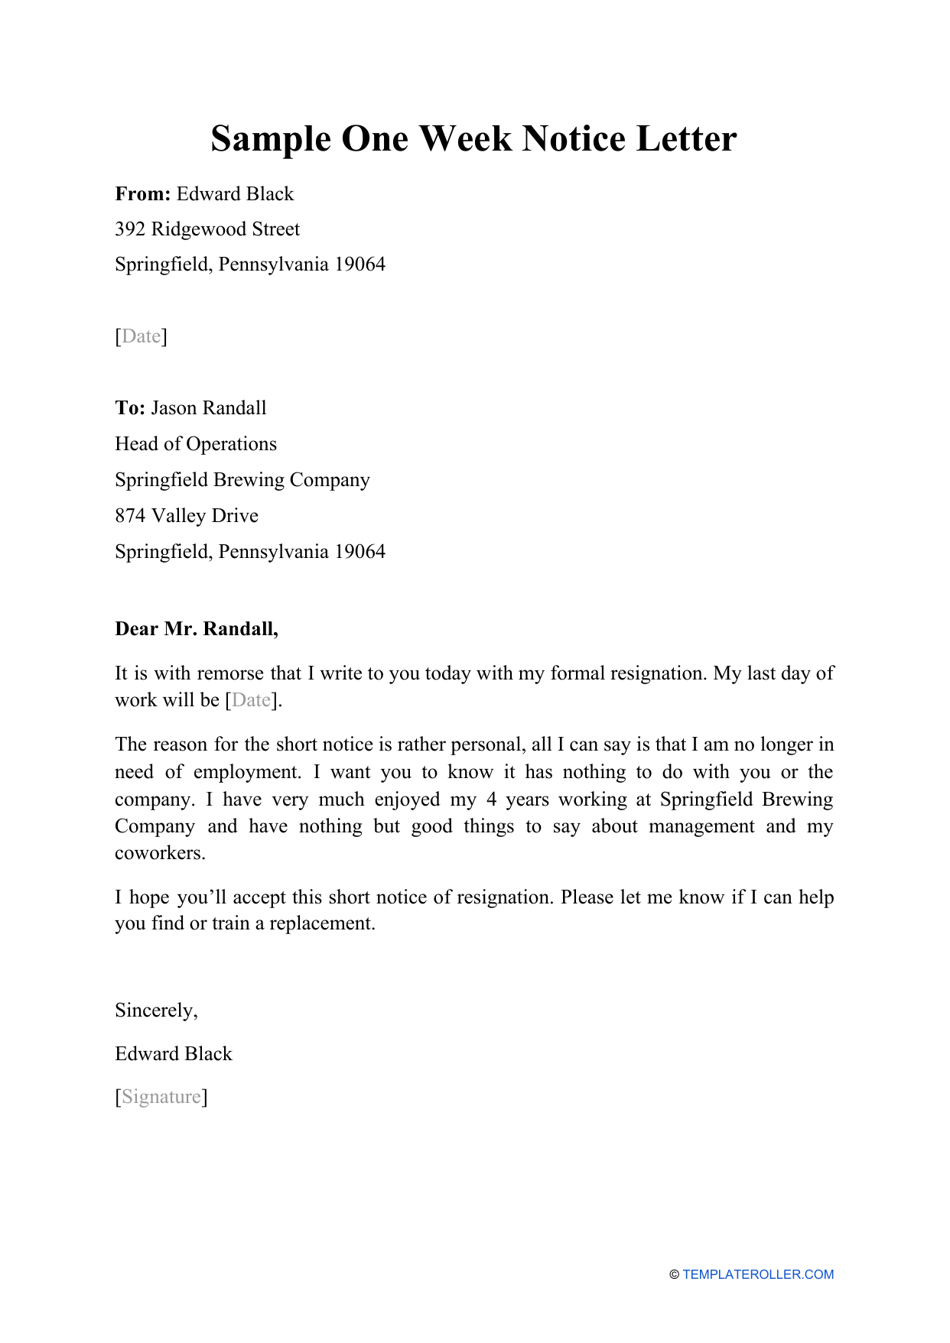 One Week Notice Letter - Template